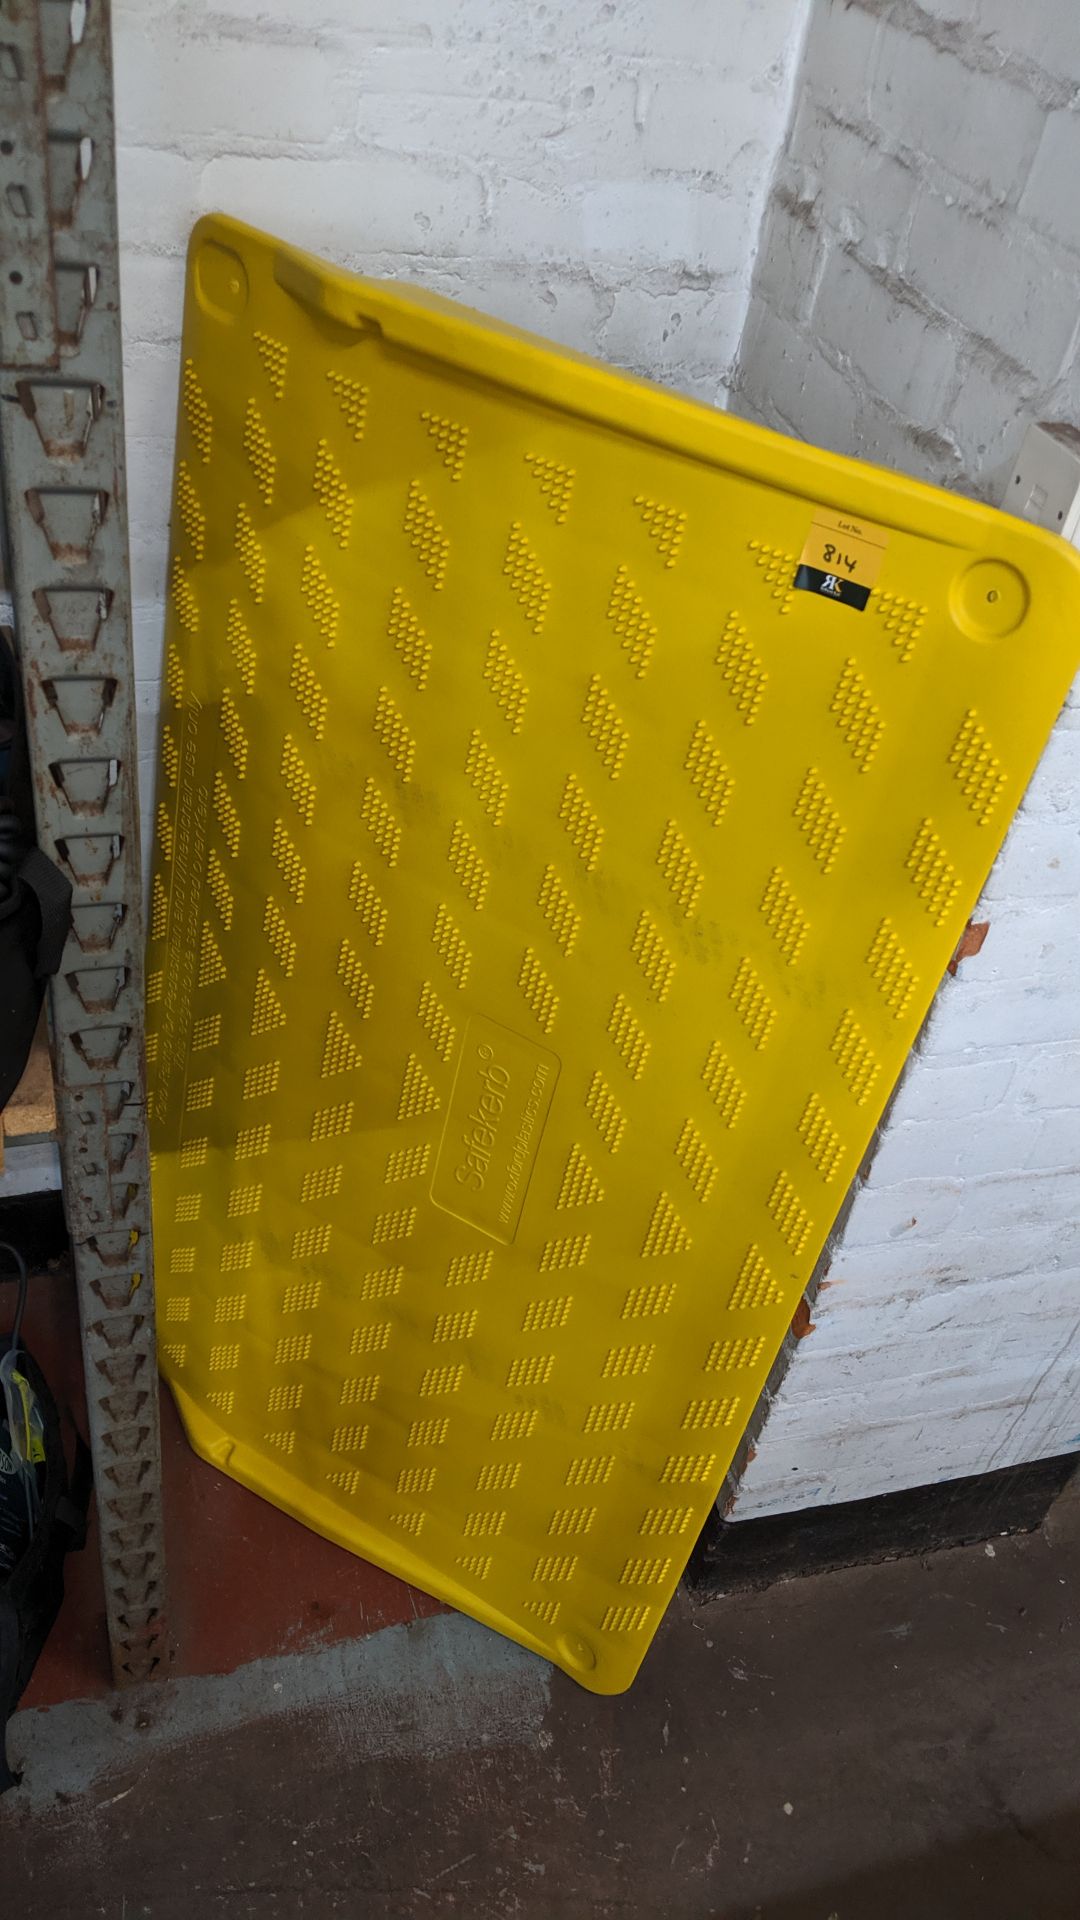 SafeKerb large yellow panel by Oxford Plastics. This is one of a large number of lots used/owned